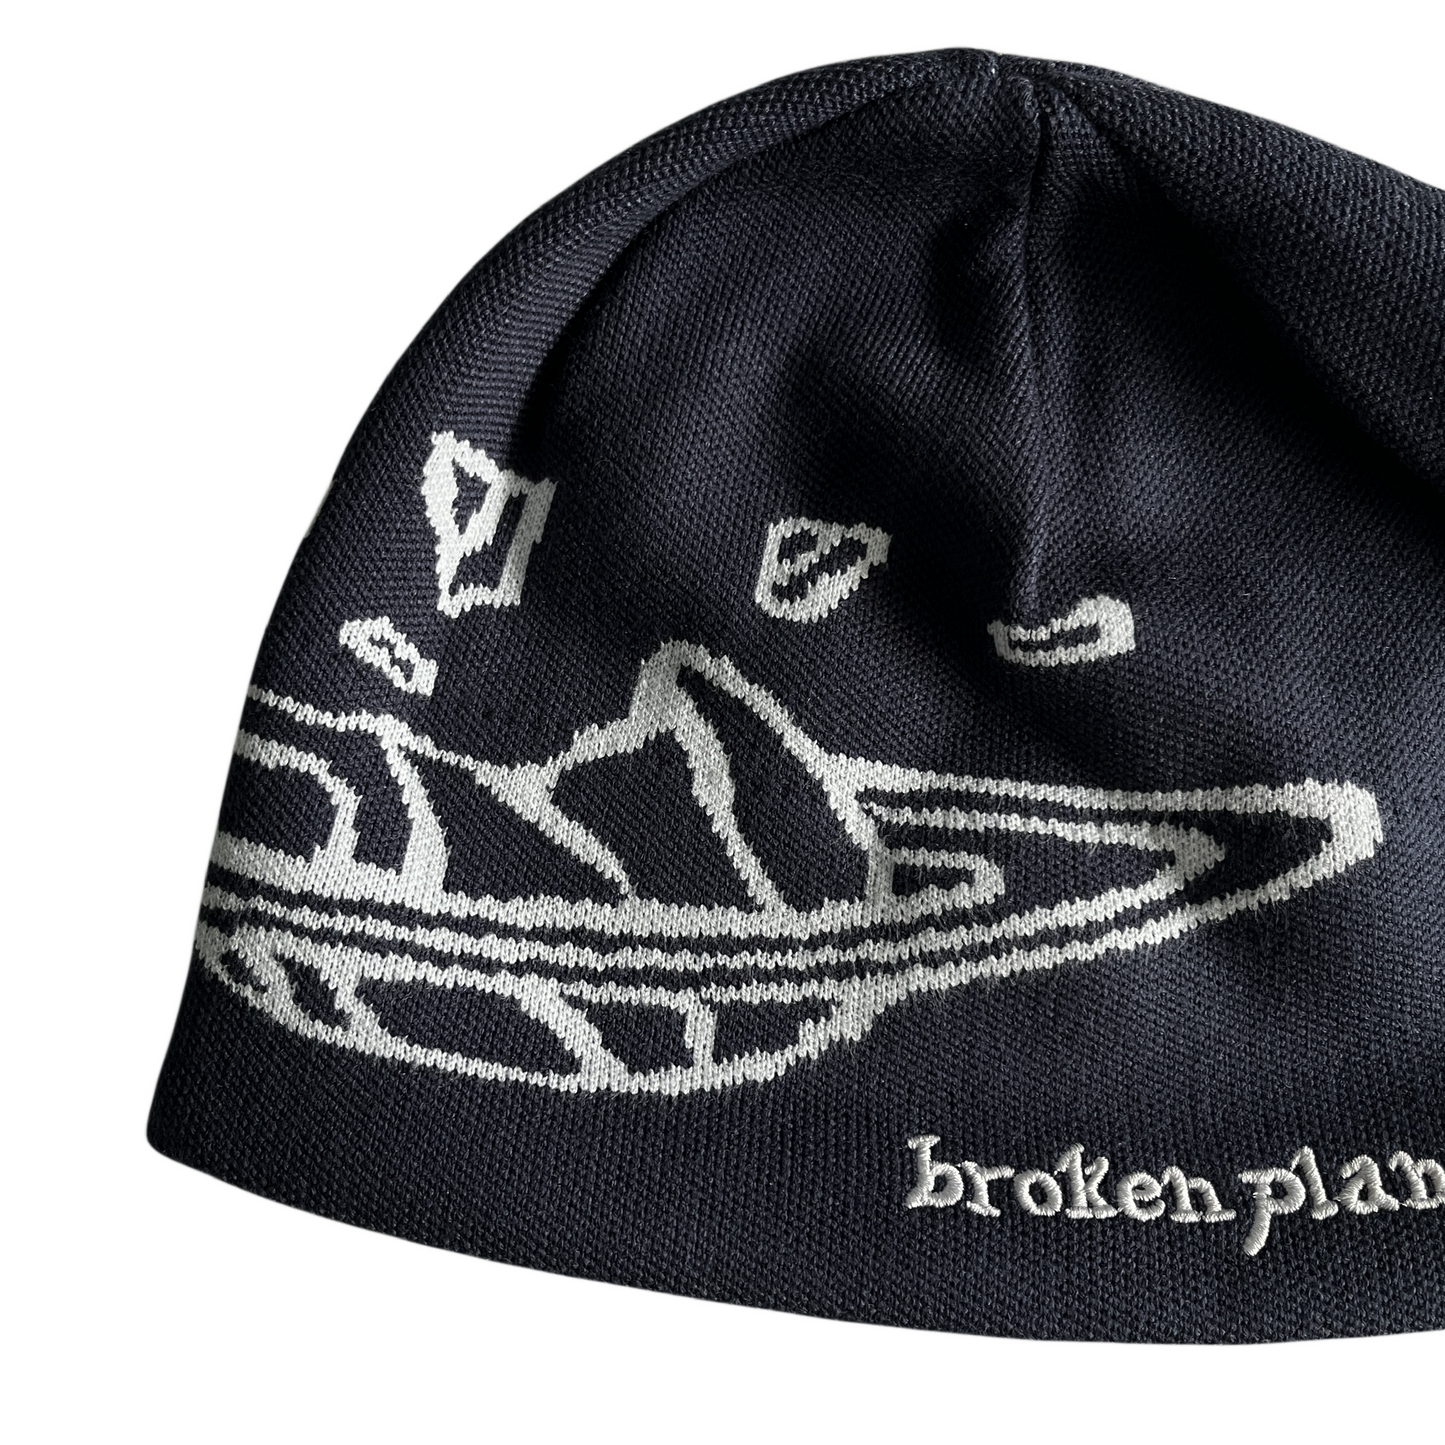 Broken Planet Knitting Beanie Berets Embroidered Letter Outer Space Beanie Hat Winter Warmth Wear Cap - OS Blue